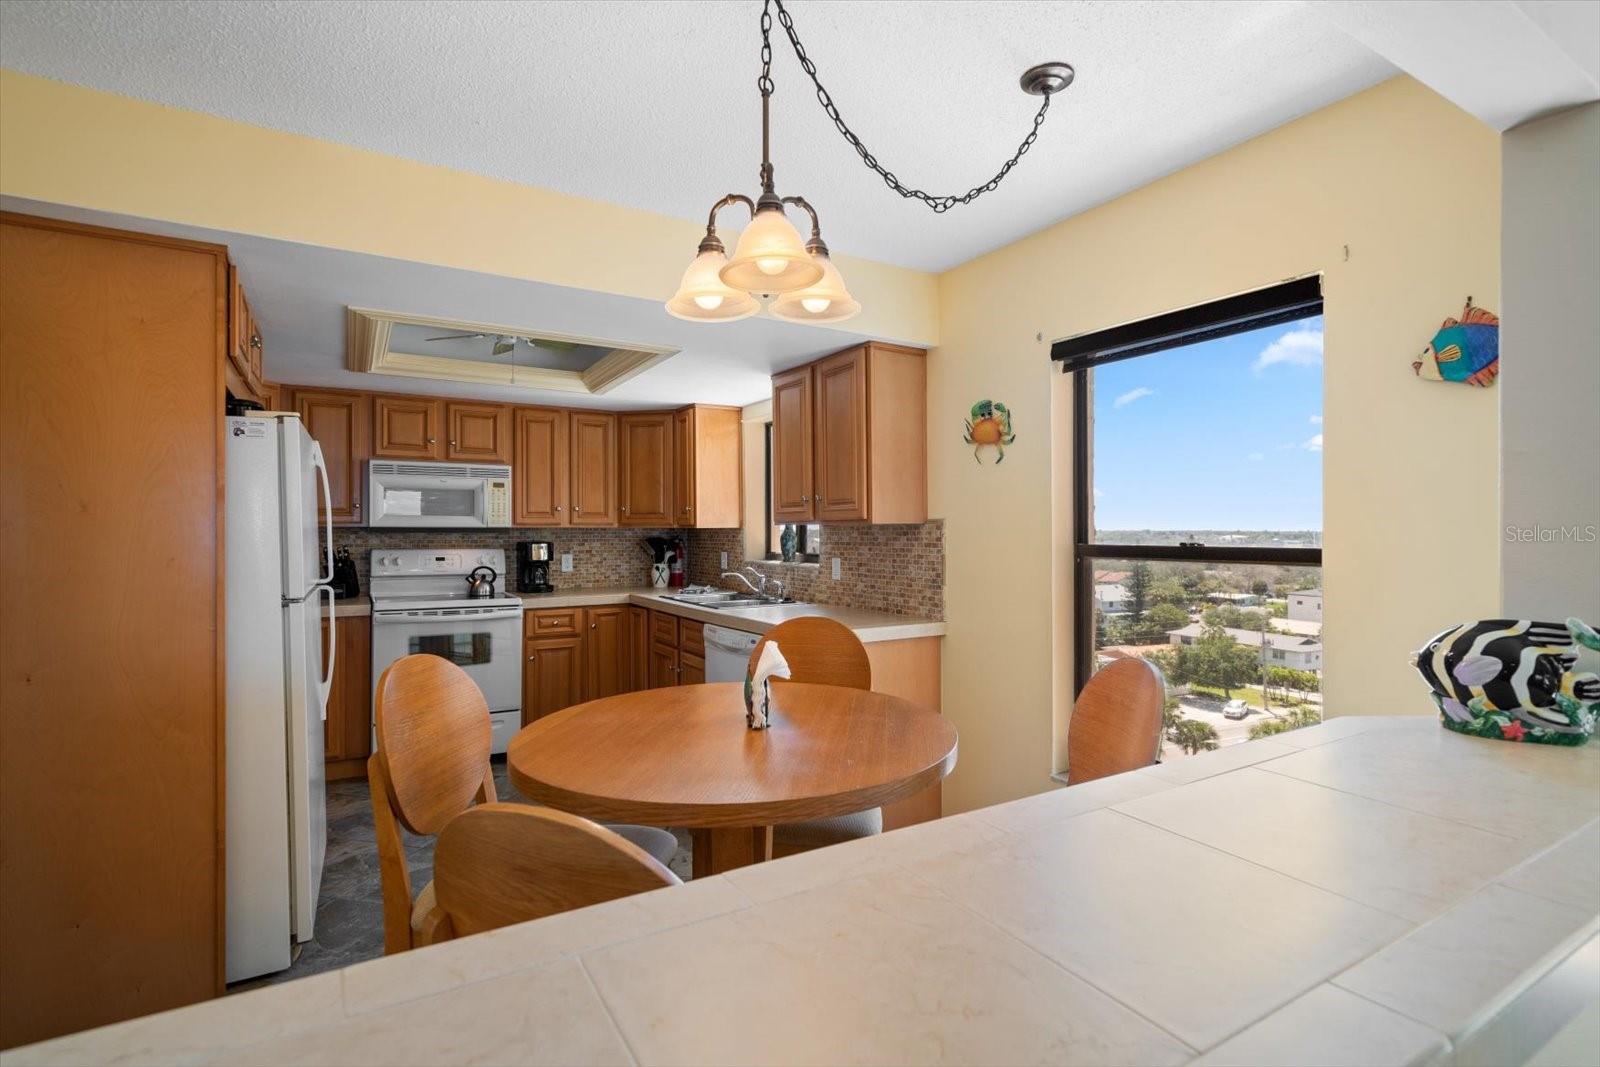 Kitchen has wonderful window to view East Parking and the Intracoastal.